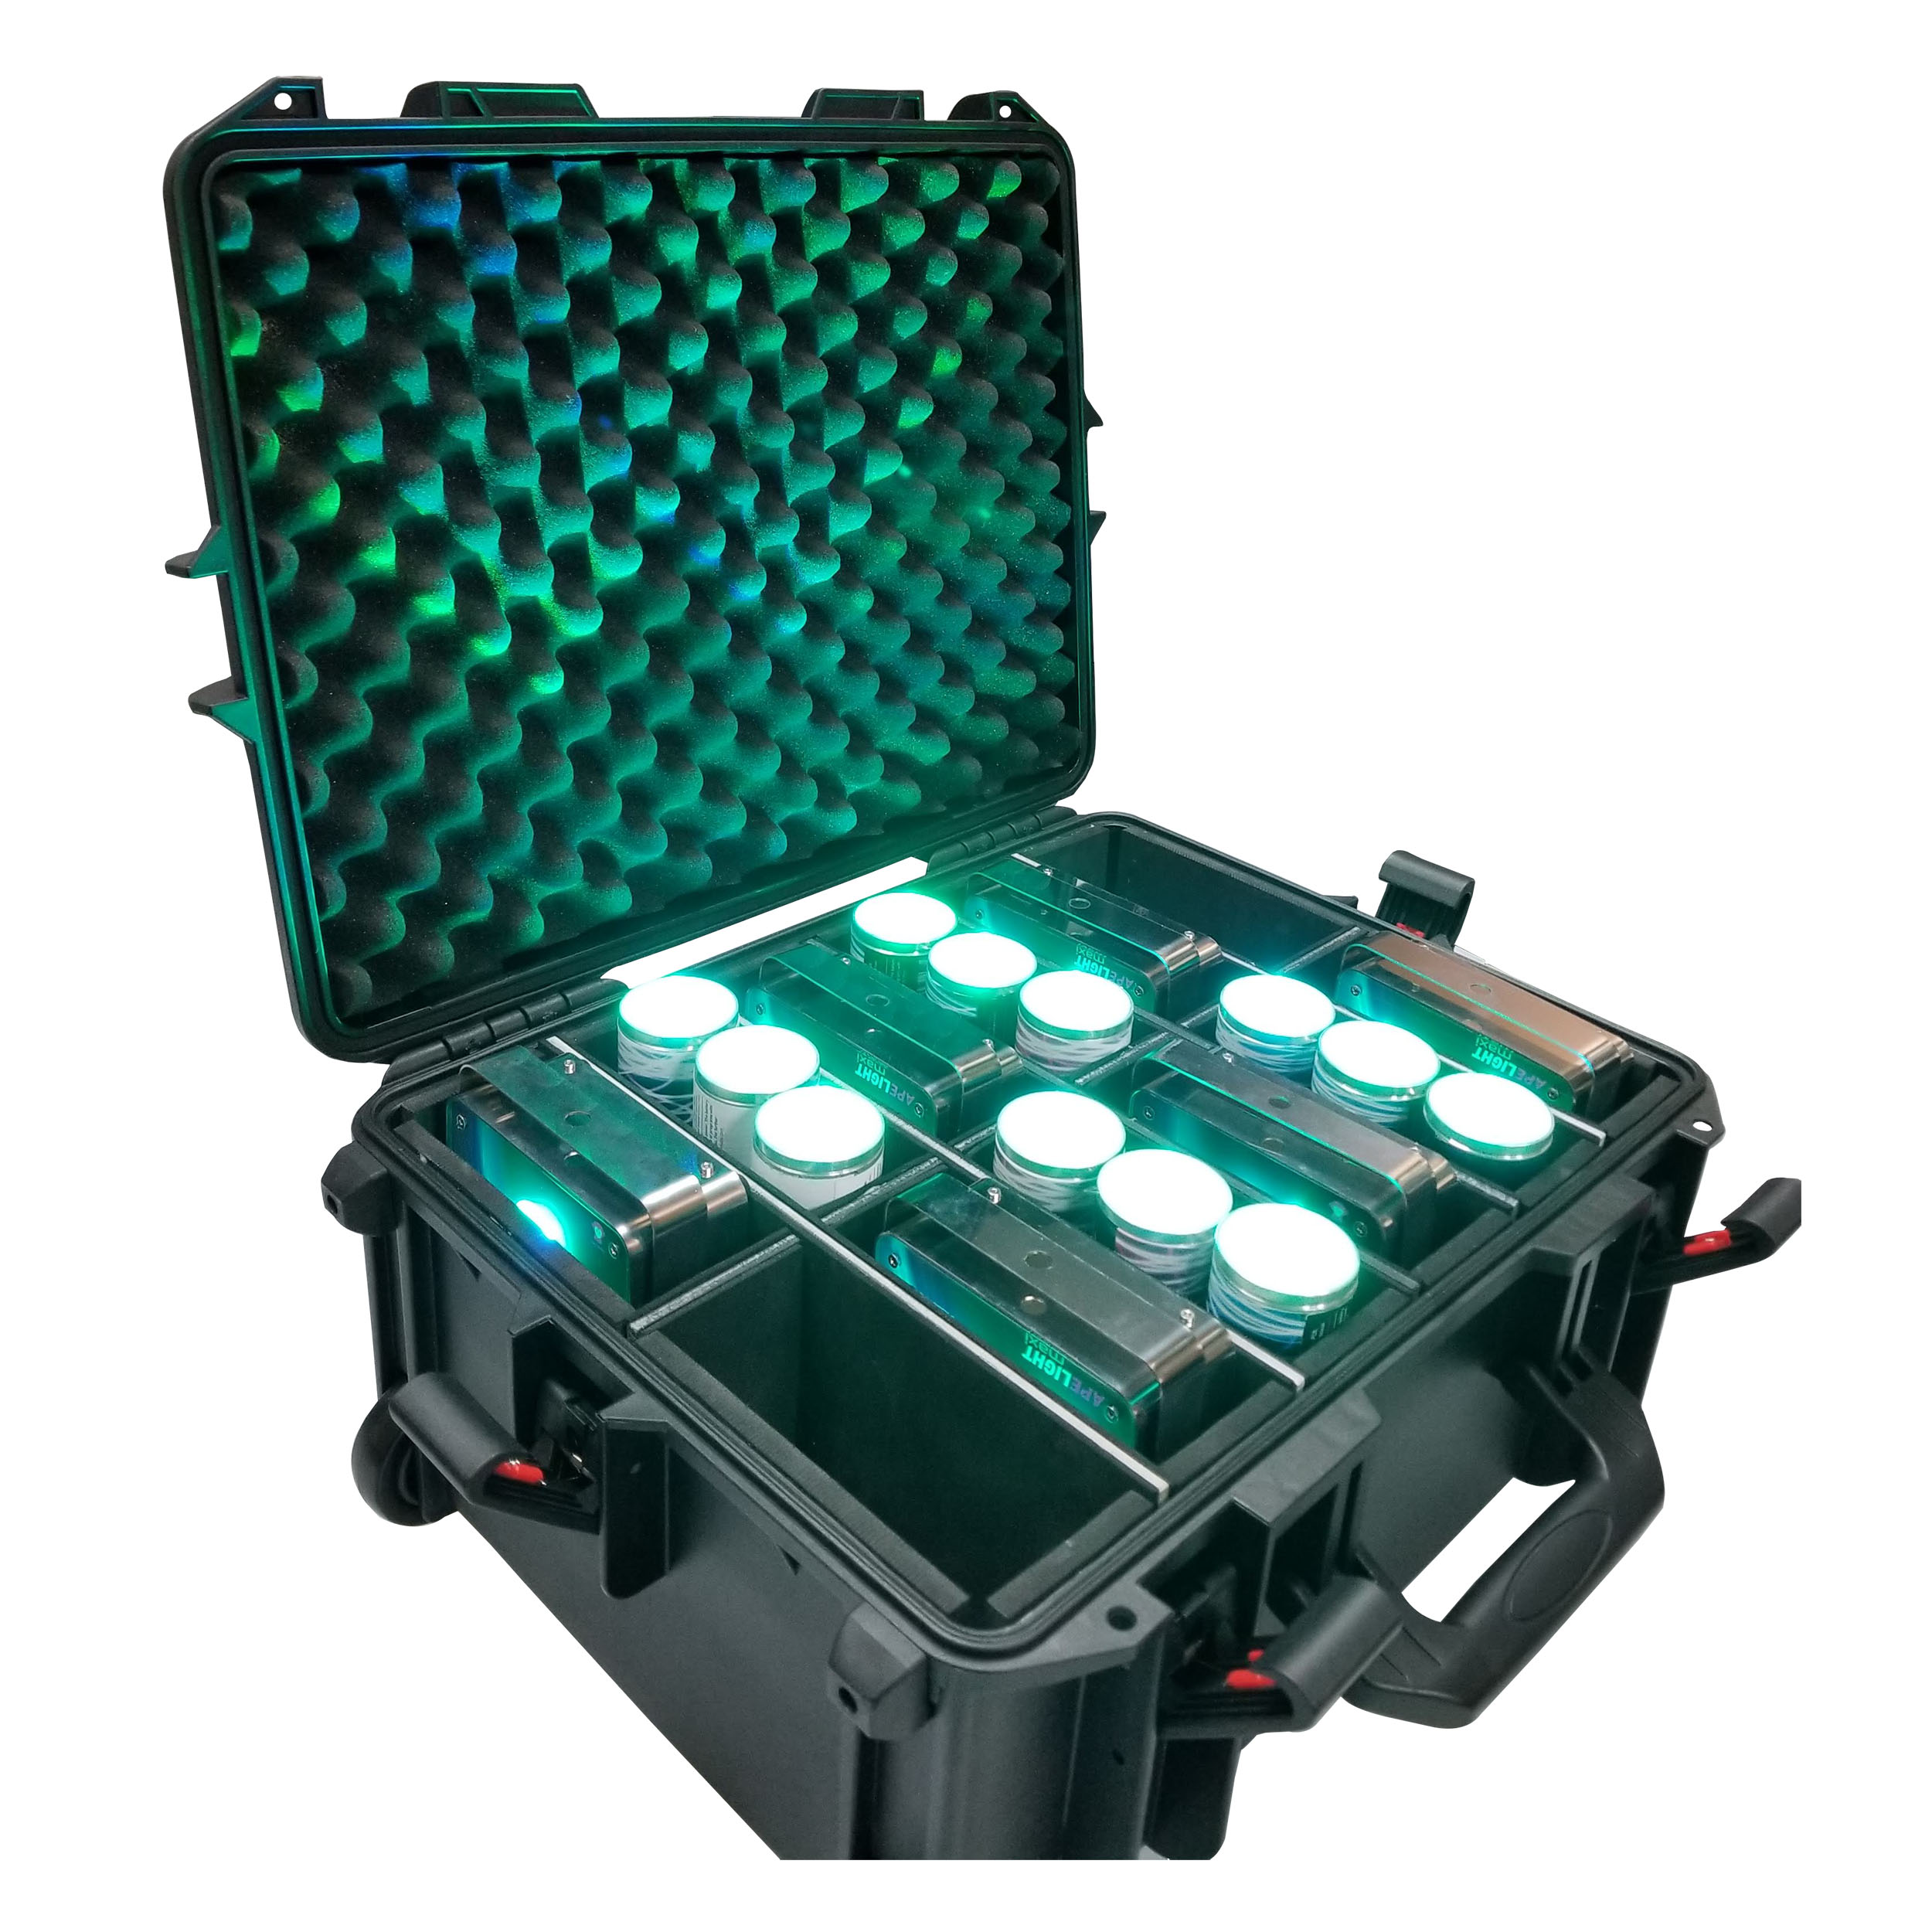 UltronX Watertight Case for 12 ApeLabs MAXI Lights W-Extendable Handle and  Wheels